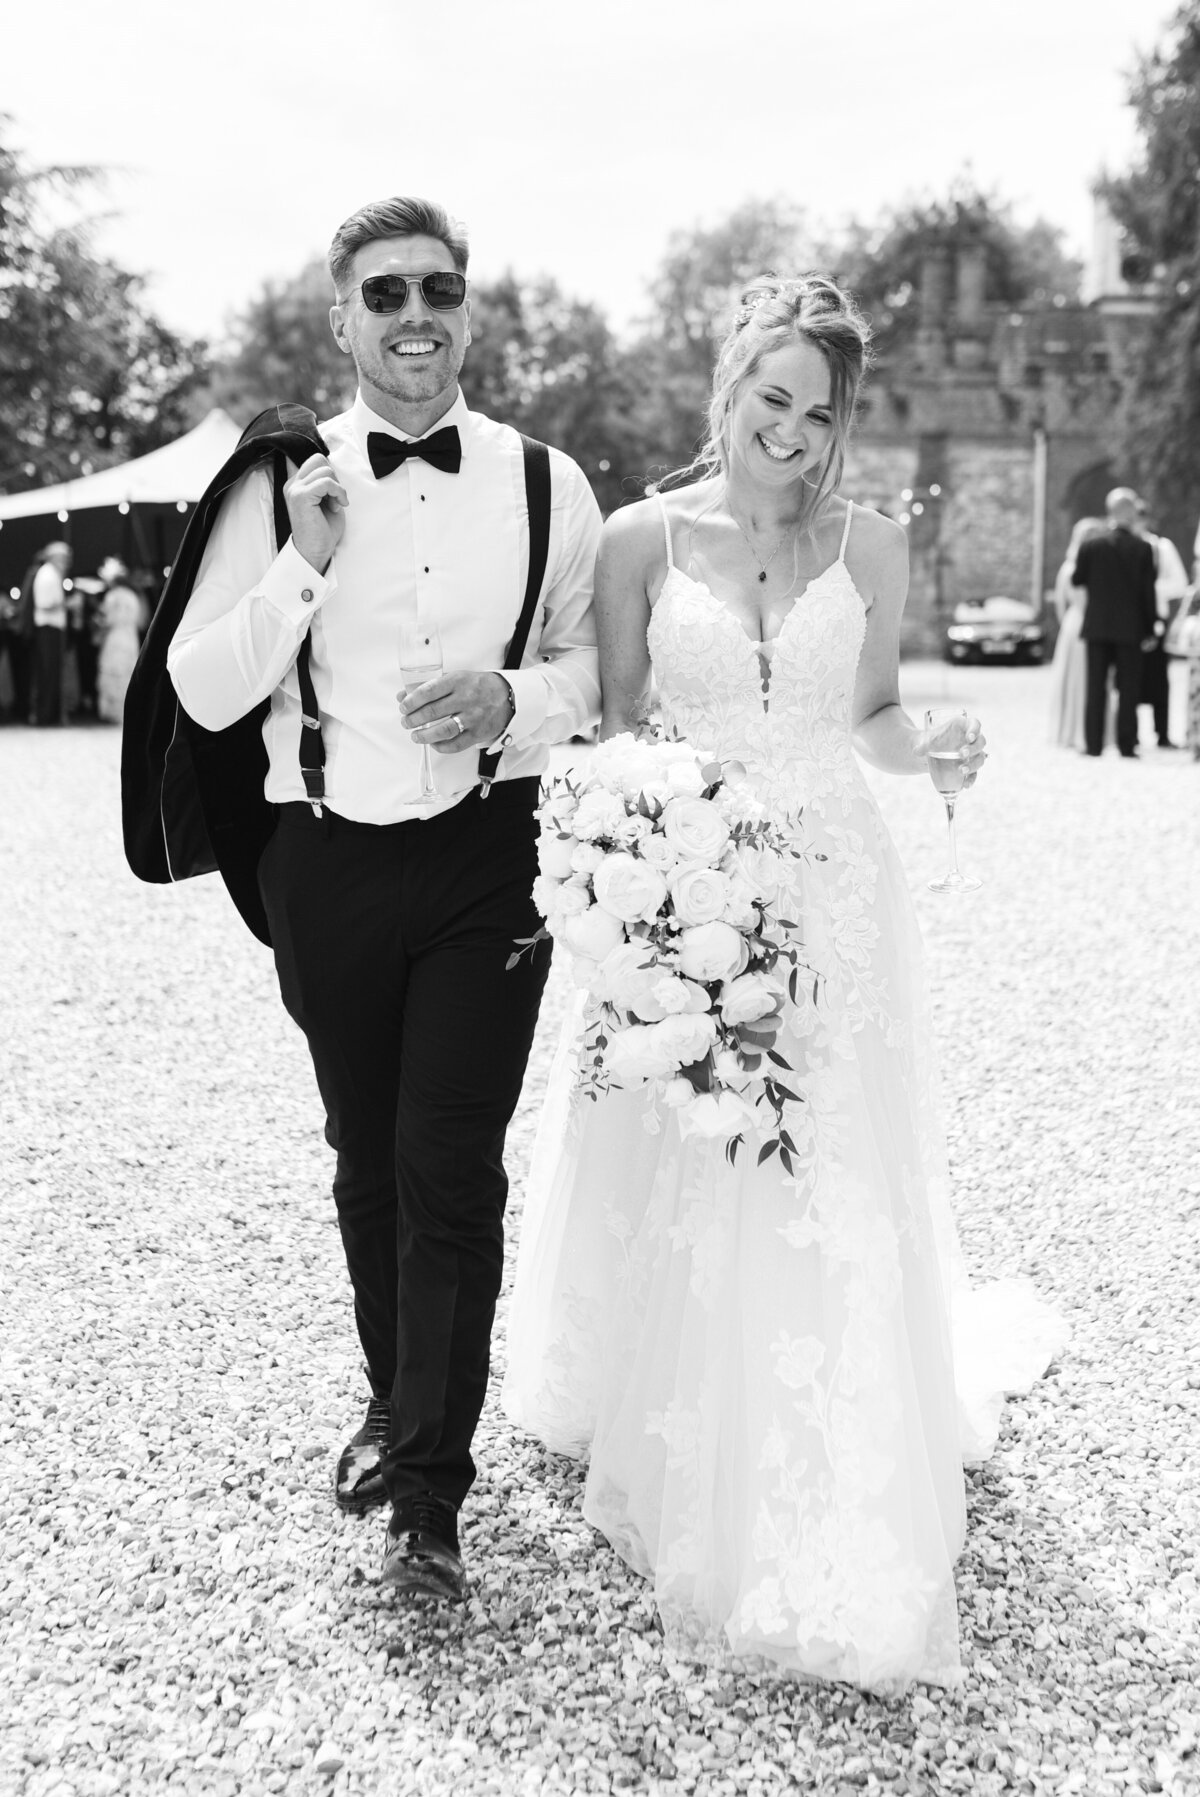 Black and white image of a bride and groom, they are walking together smiling. the groom is holding his jacket over his shoulder and is wearing sunglasses, the bride is wearing a white lace dress with thin straps and is holding her bouquet and a glass of champagne